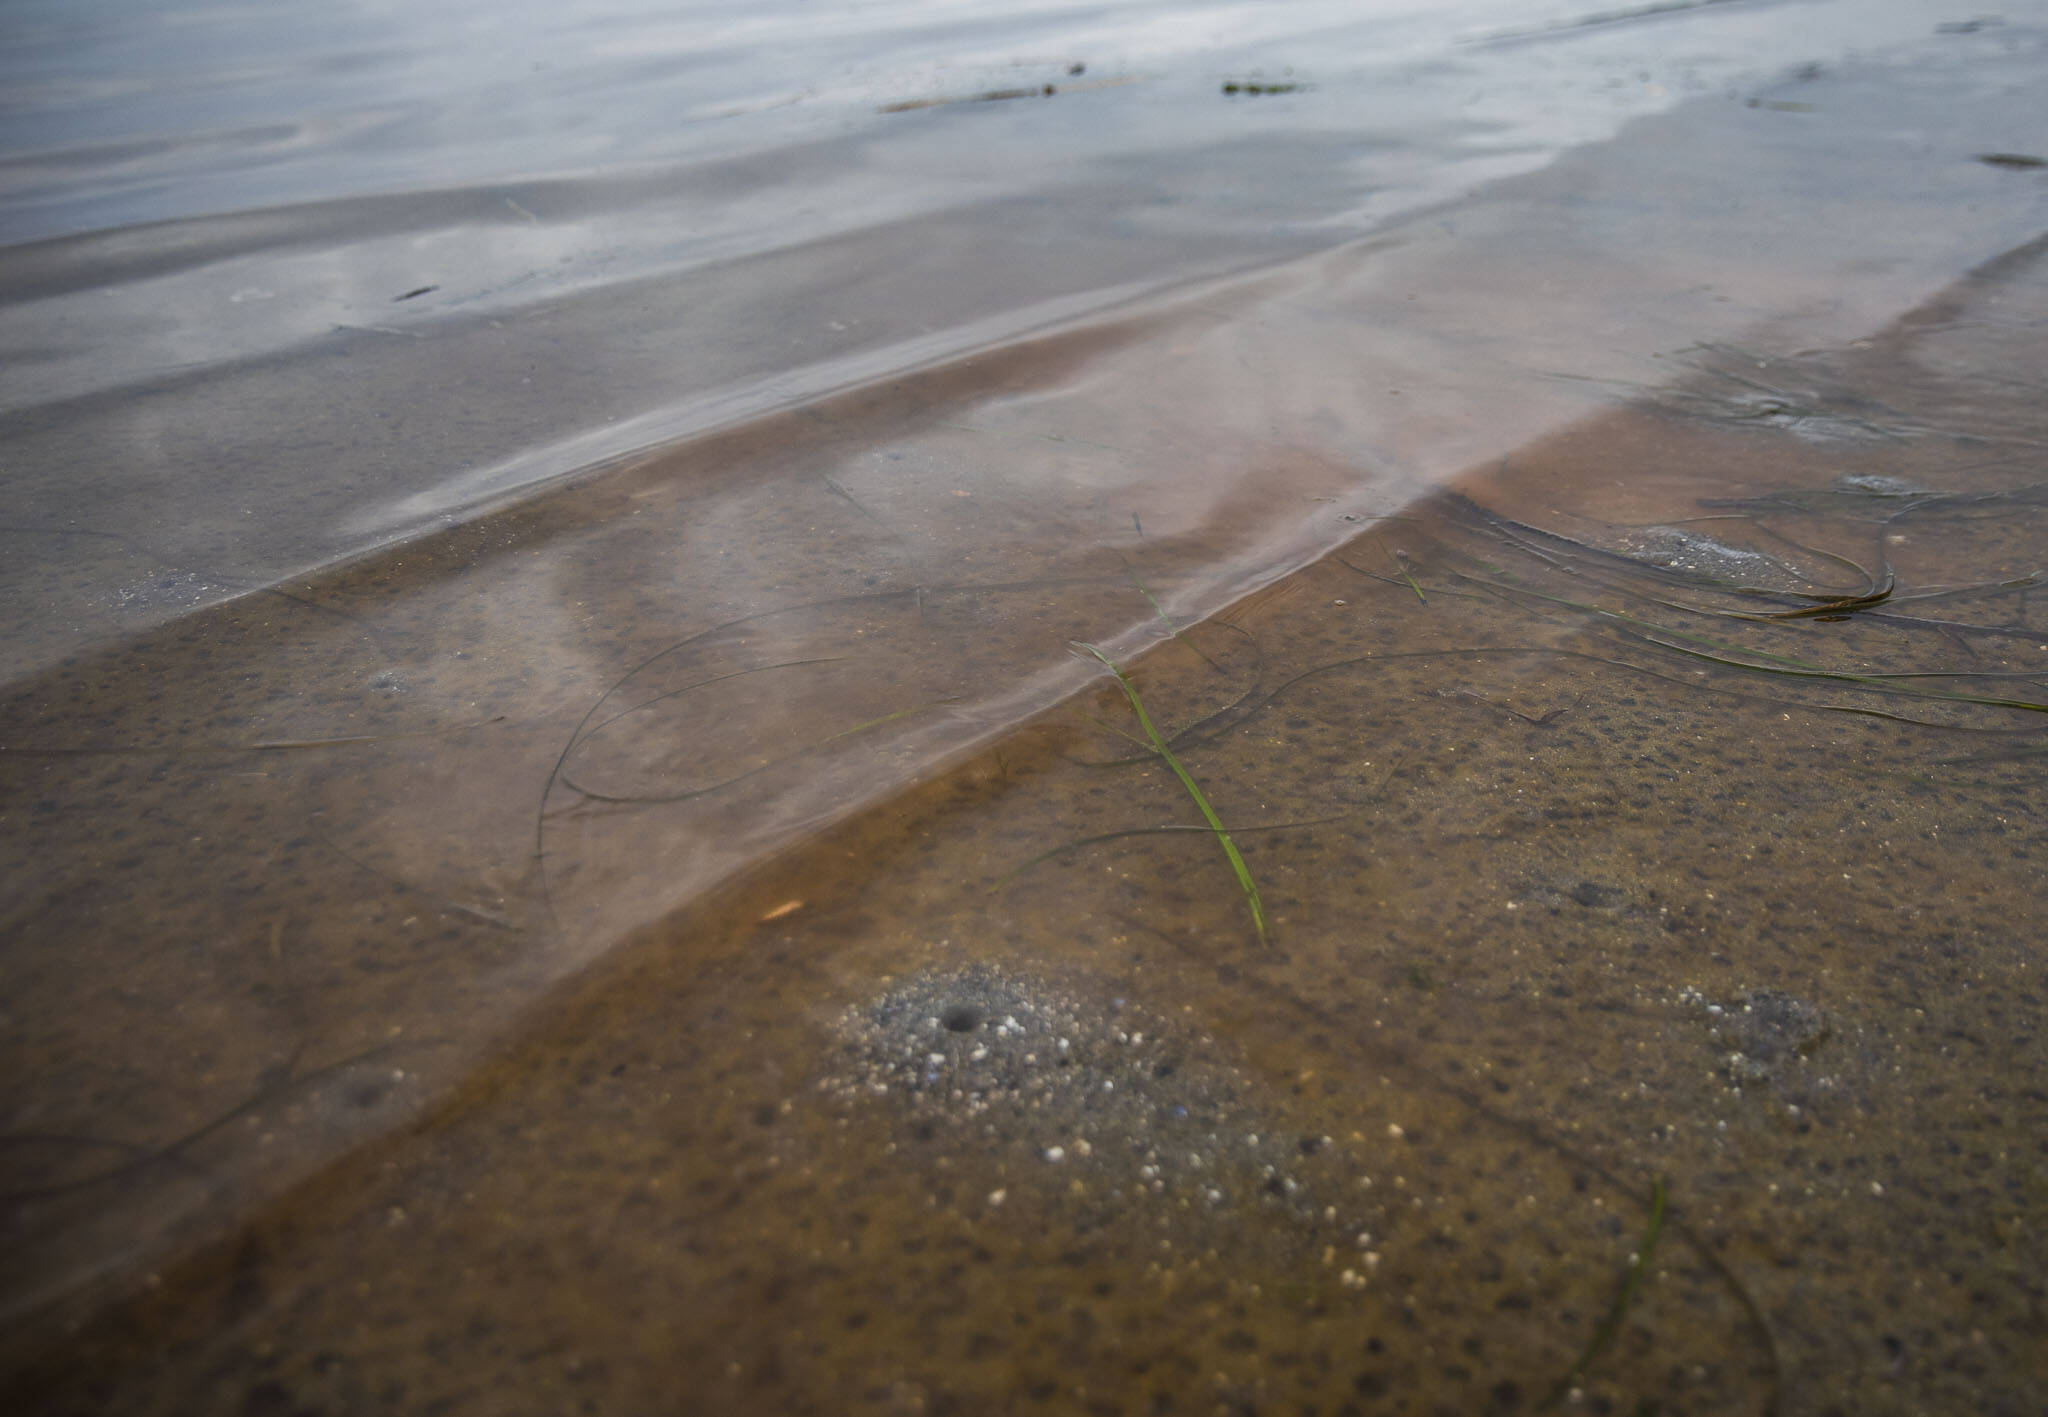 Remnants of red dye released to help check shellfish health washes up on the beach at Windjammer Park on Sept. 12, in Oak Harbor. (Olivia Vanni / The Herald)